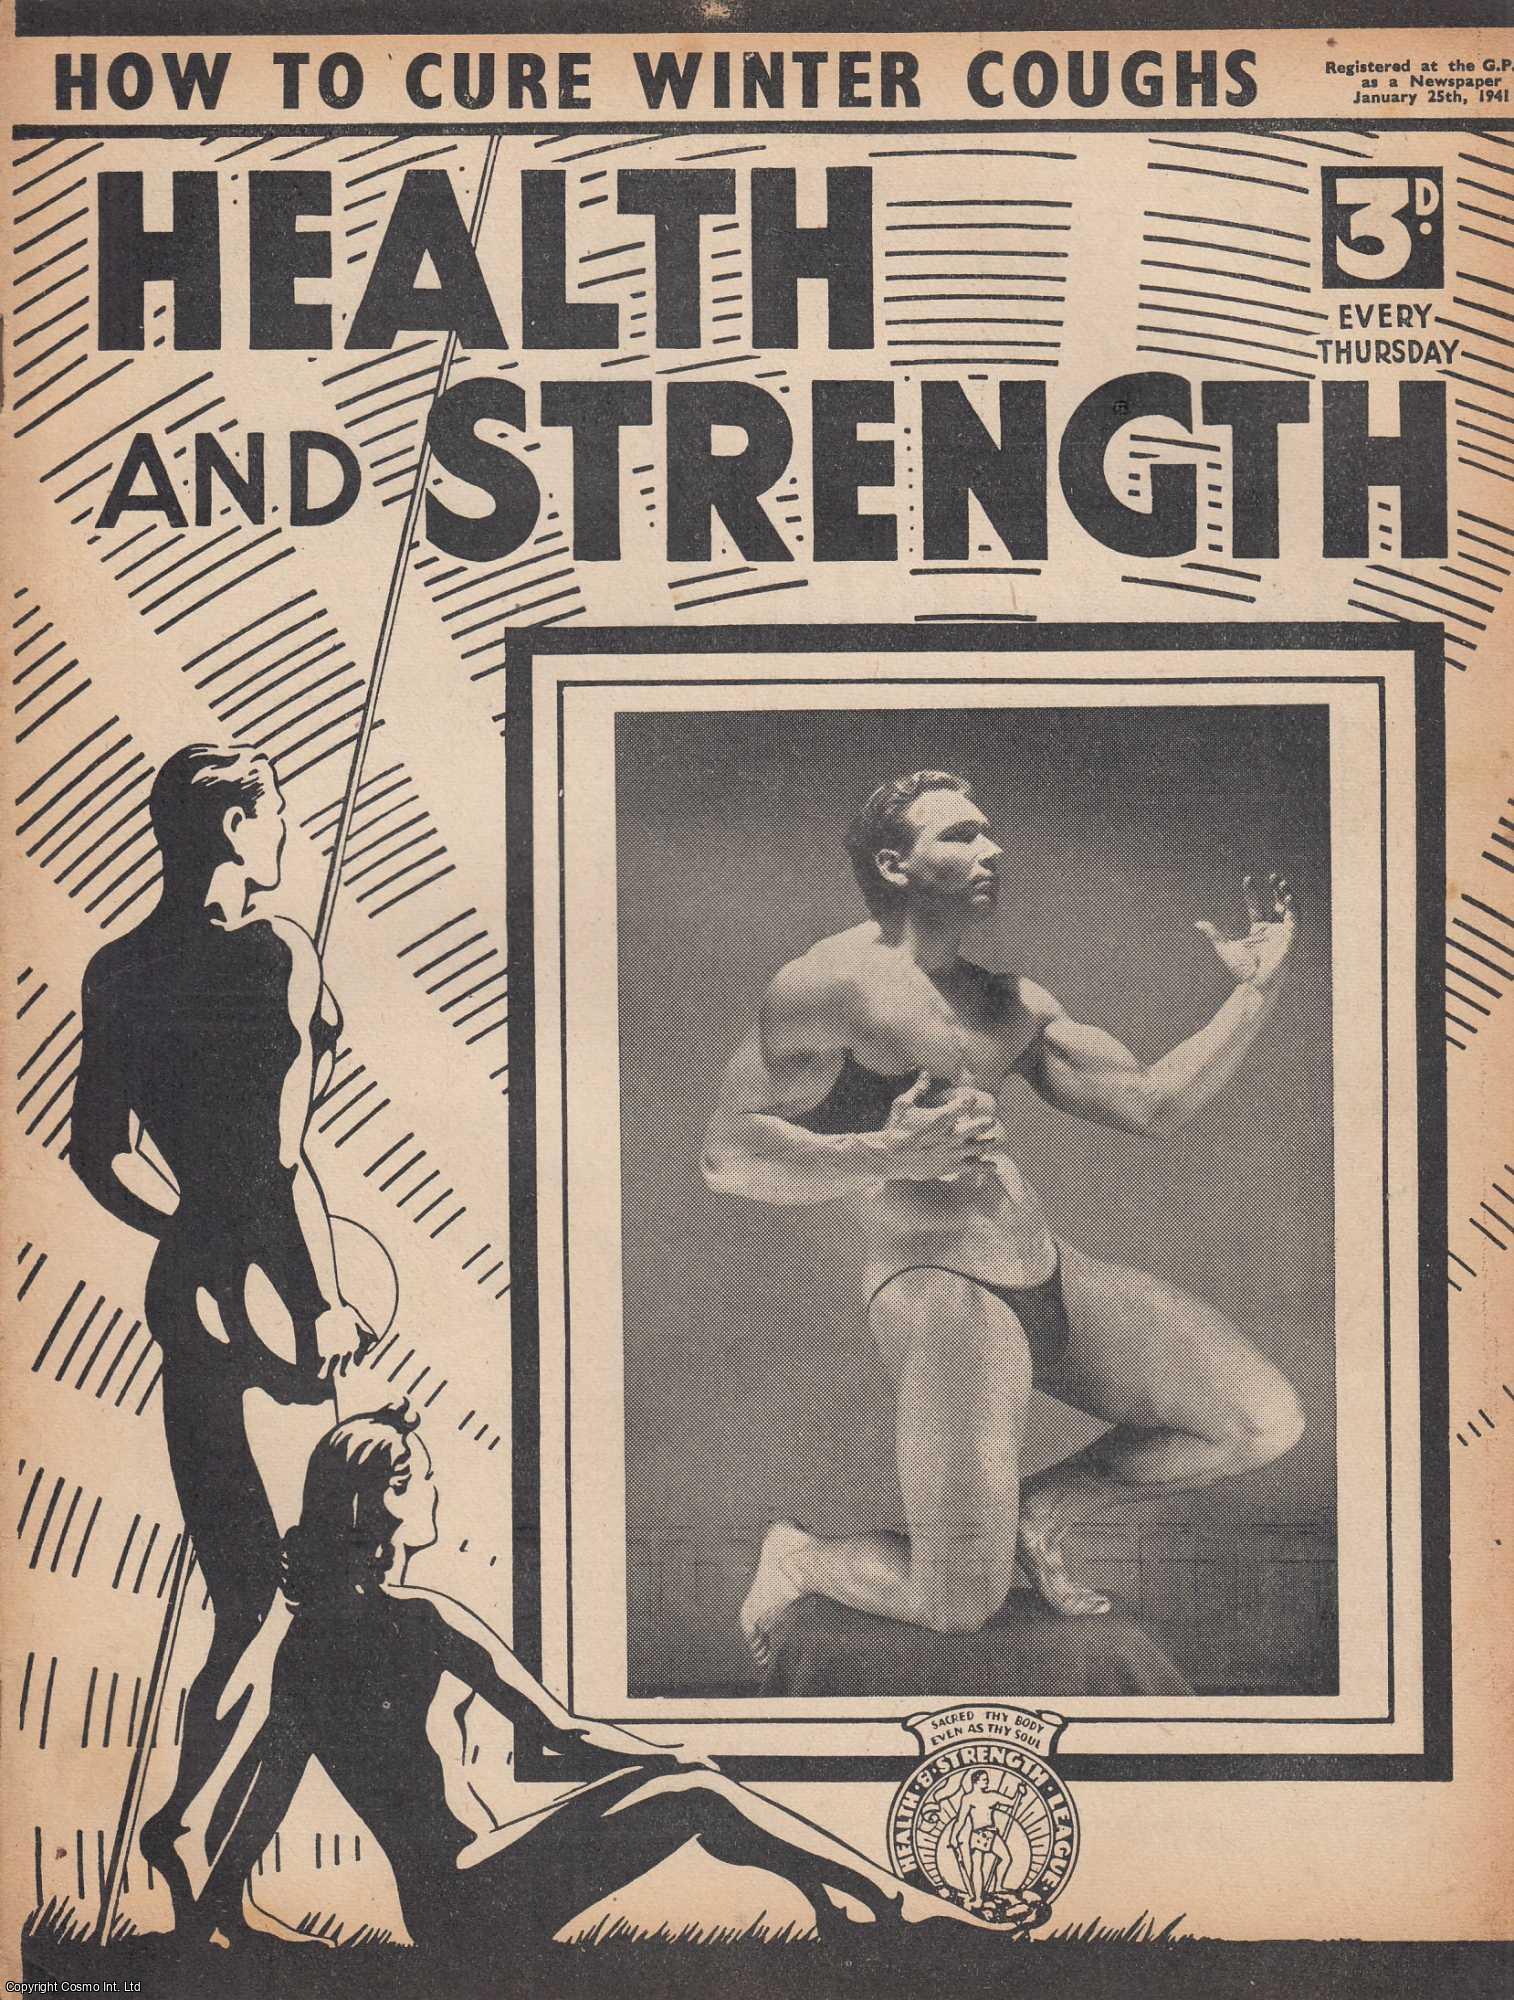 Body Building - How to Cure Winter Coughs. Health and Strength Magazine, January 25, 1941. Vol LXVIII, No 4.